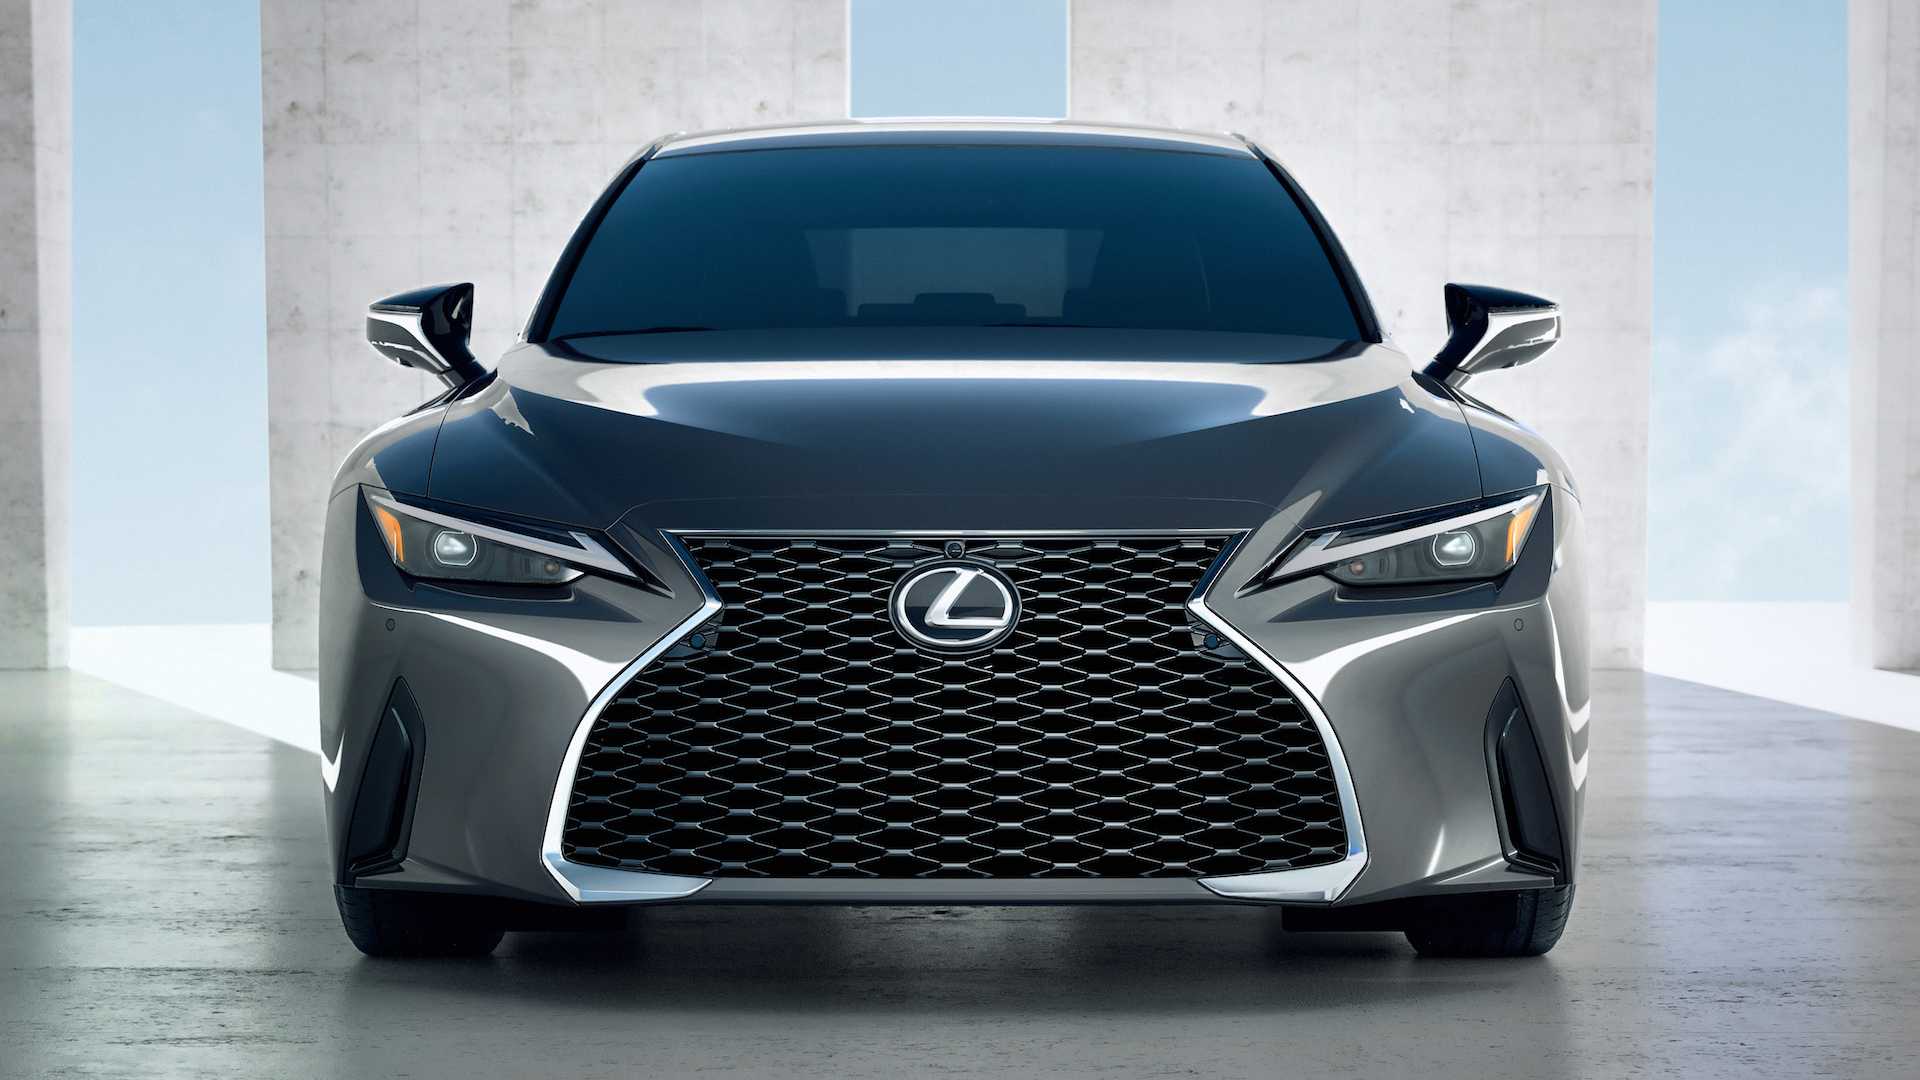 Lexus IS (2021) face lifting